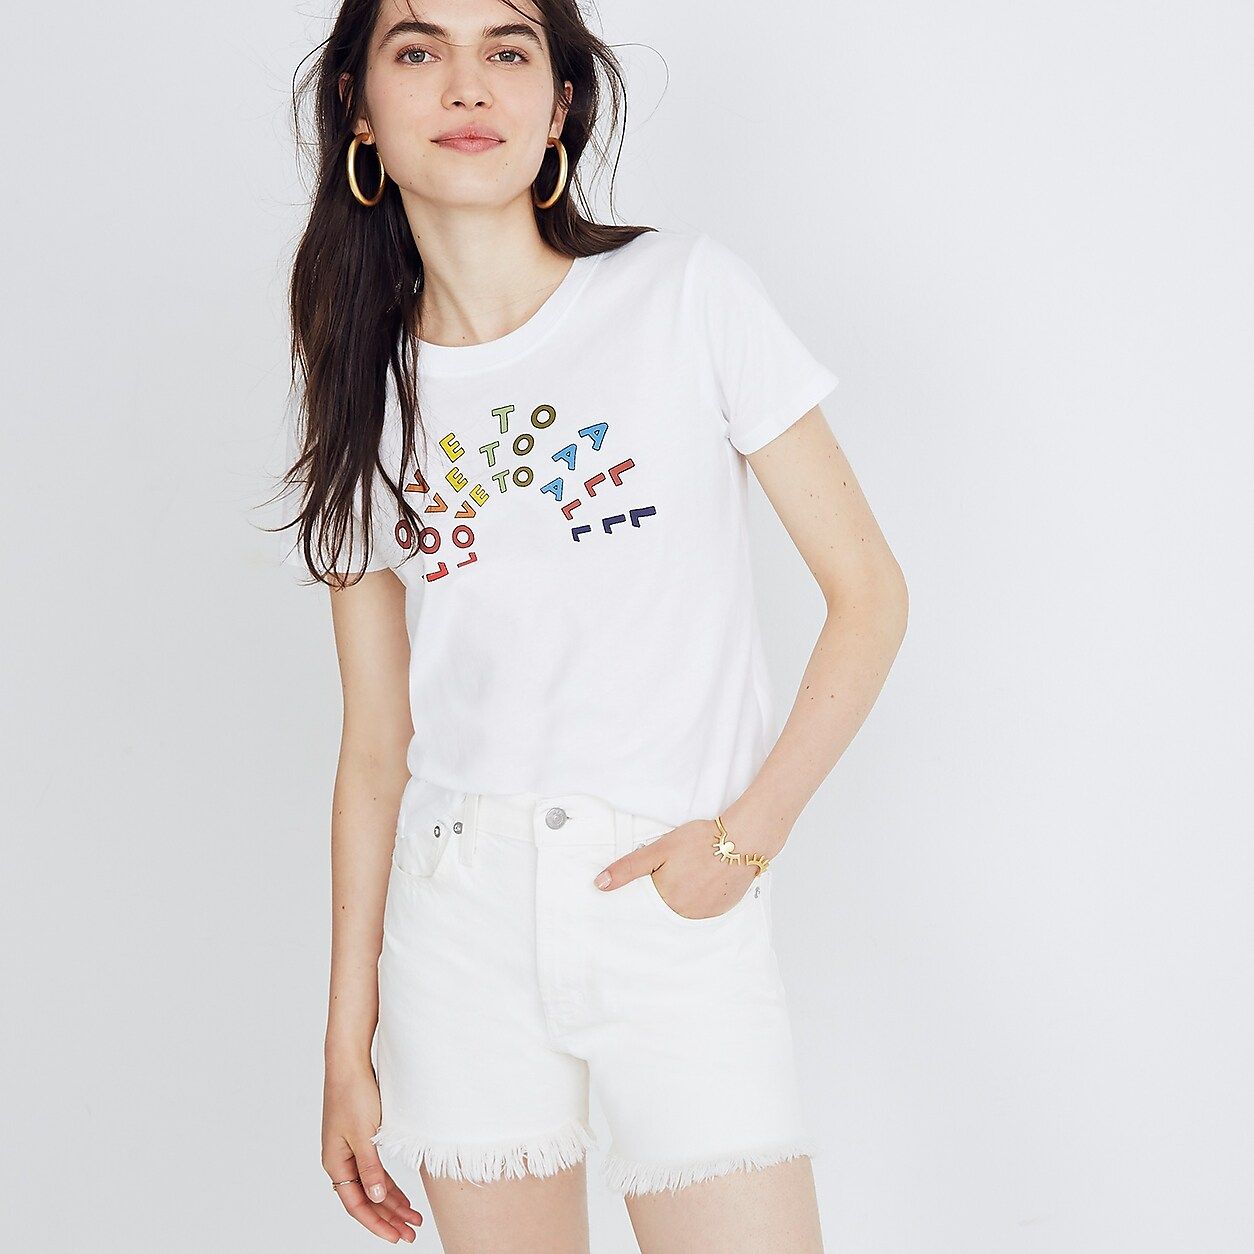 Madewell X Human Rights Campaign "love to all" T-shirt | J.Crew US